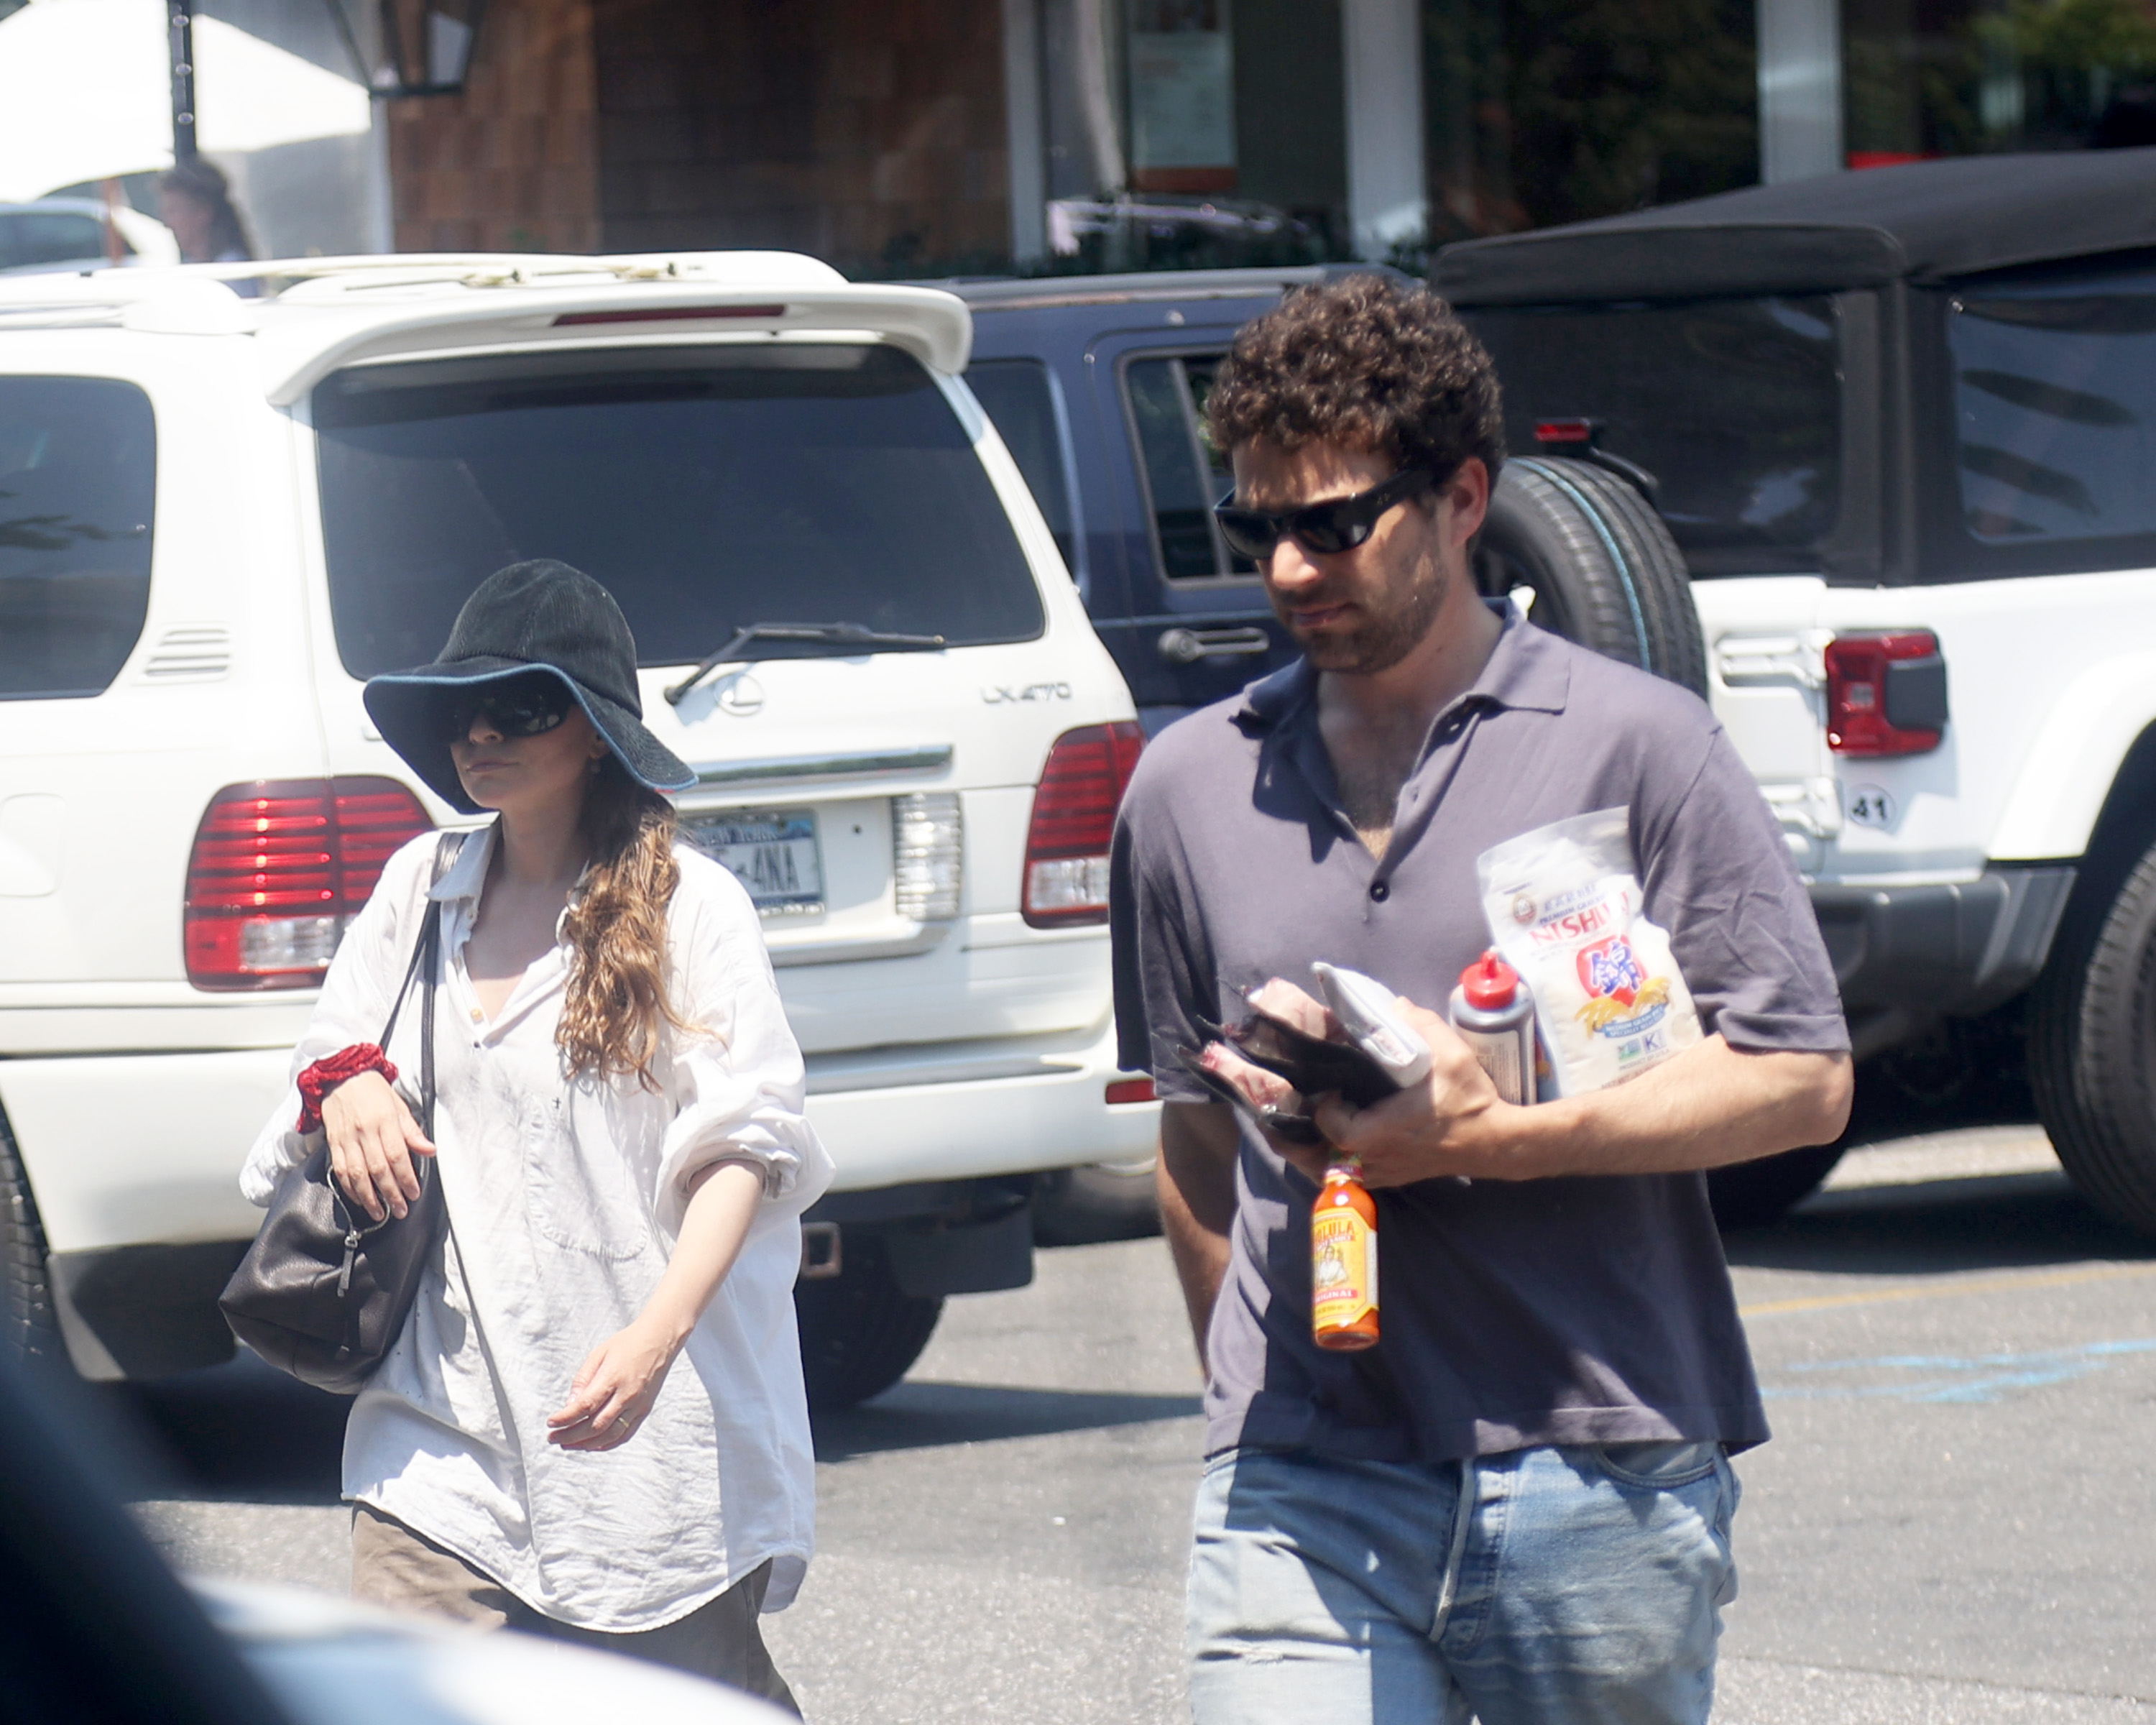 While in The Hamptons, Ashley Olsen and her husband Louis Eisner were spotted grabbing breakfast